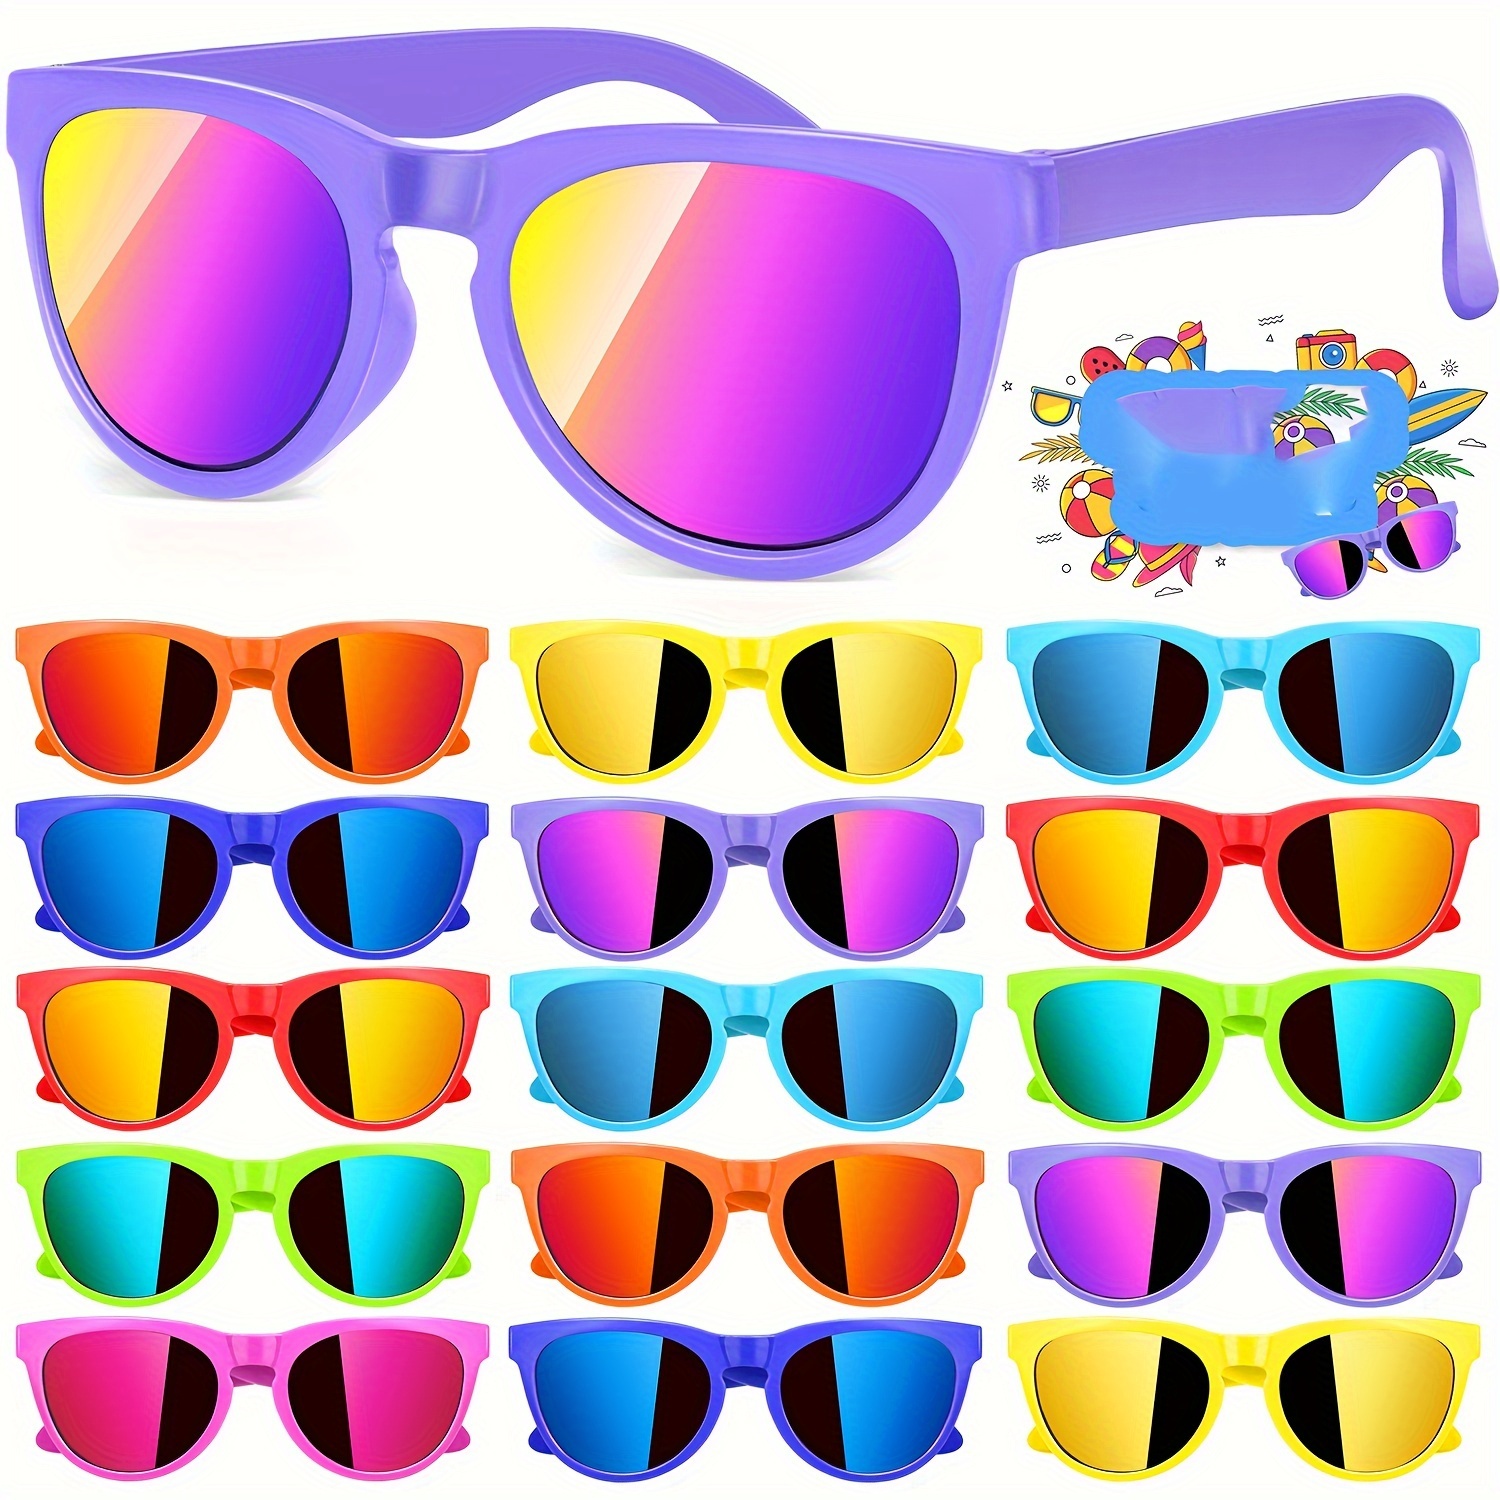 

Kids' Party Fashion Fashion Glasses 16/24 Piece - Stylish Solid Color, Perfect For Boys & Girls Ages 3-8, Ideal For Summer Beach & Pool Parties, Great Gift Bag Fillers